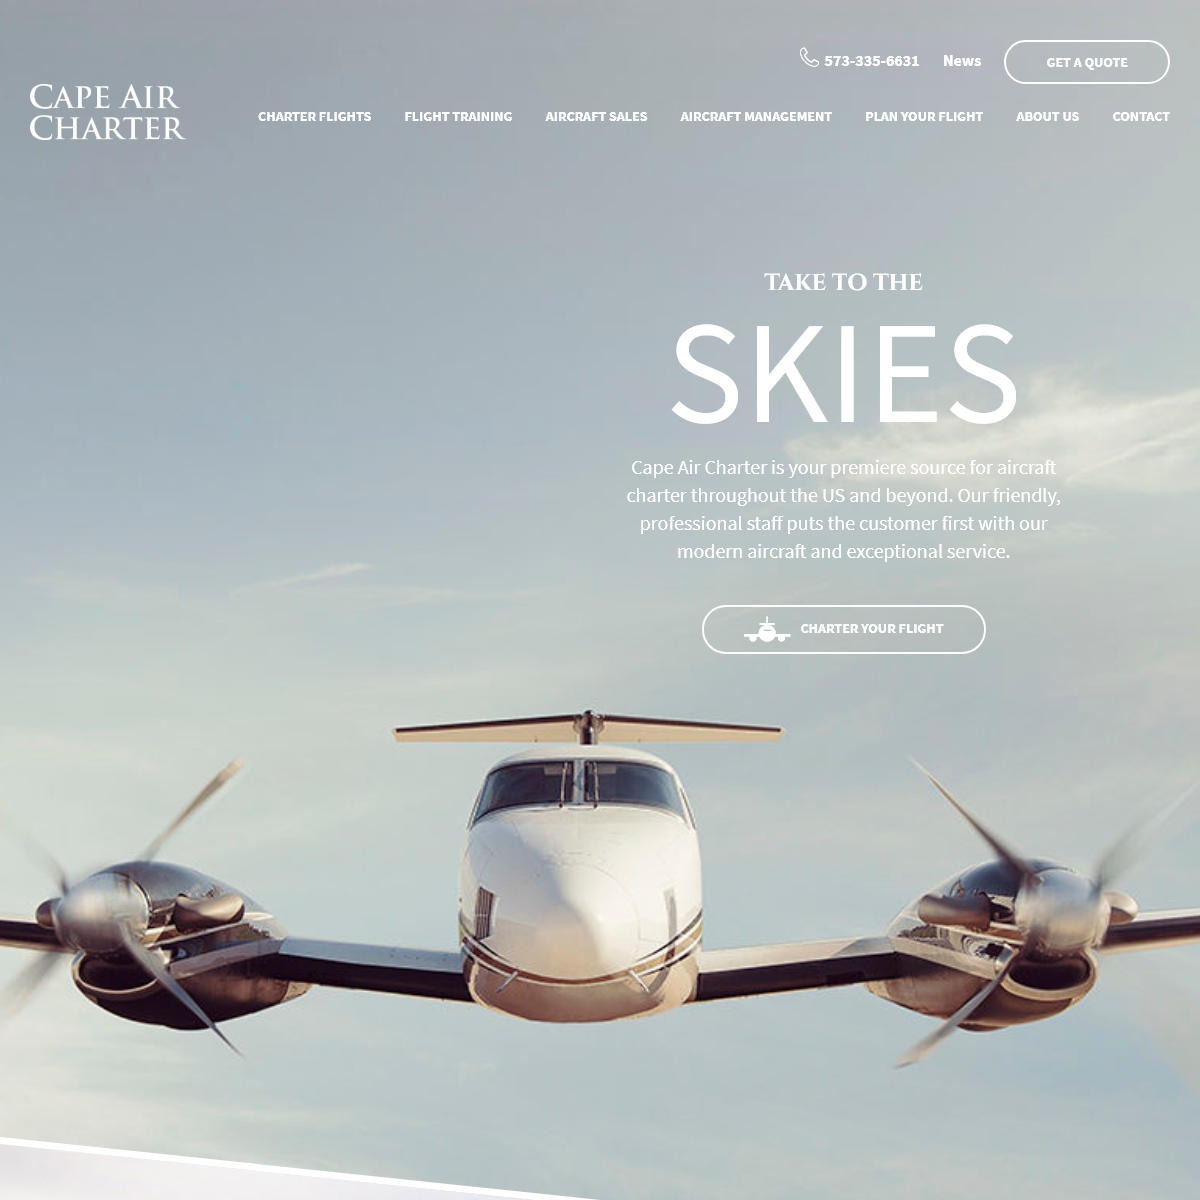 A complete backup of capeaircharter.com